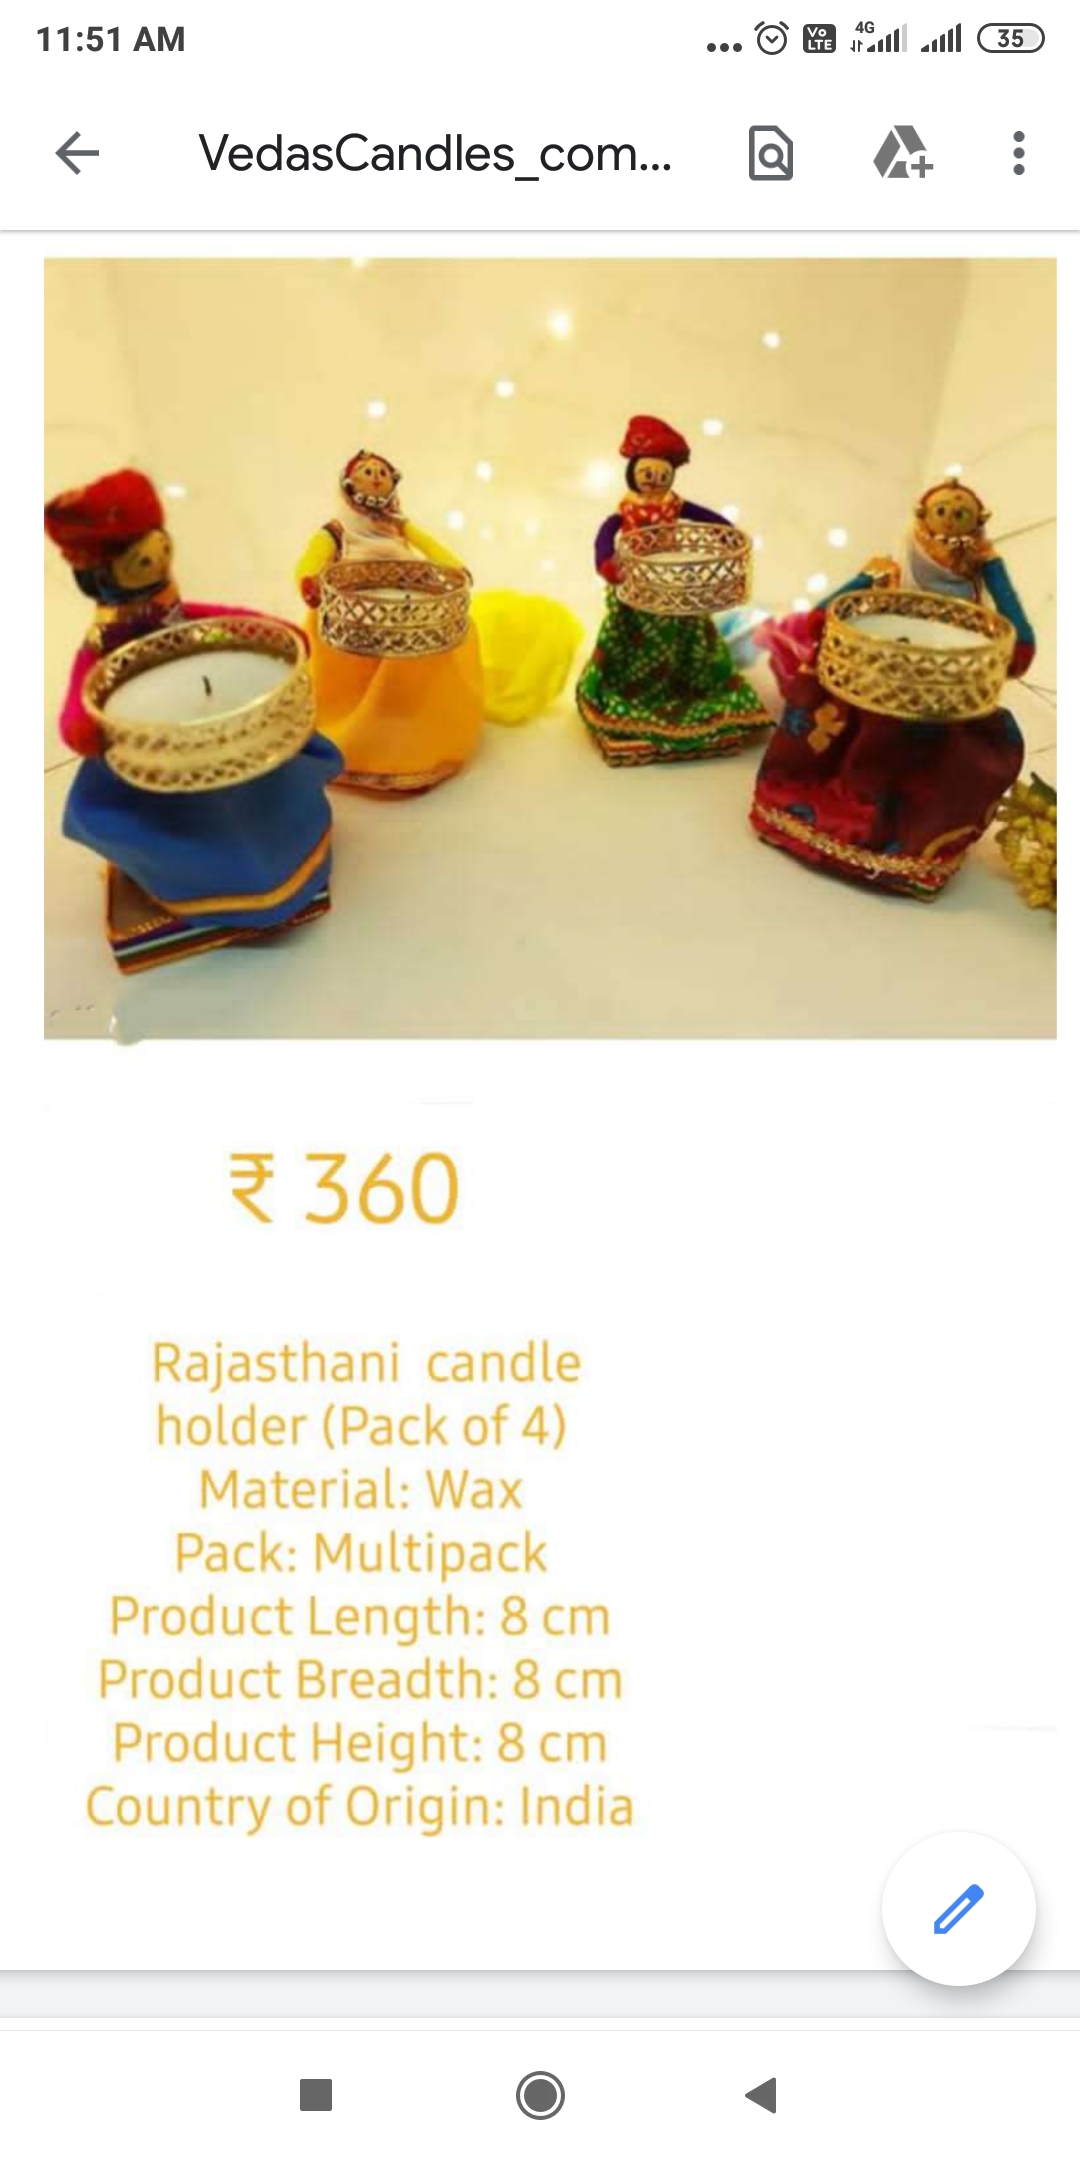 Rajasthani candle holders from Veda's Decor Enterprises